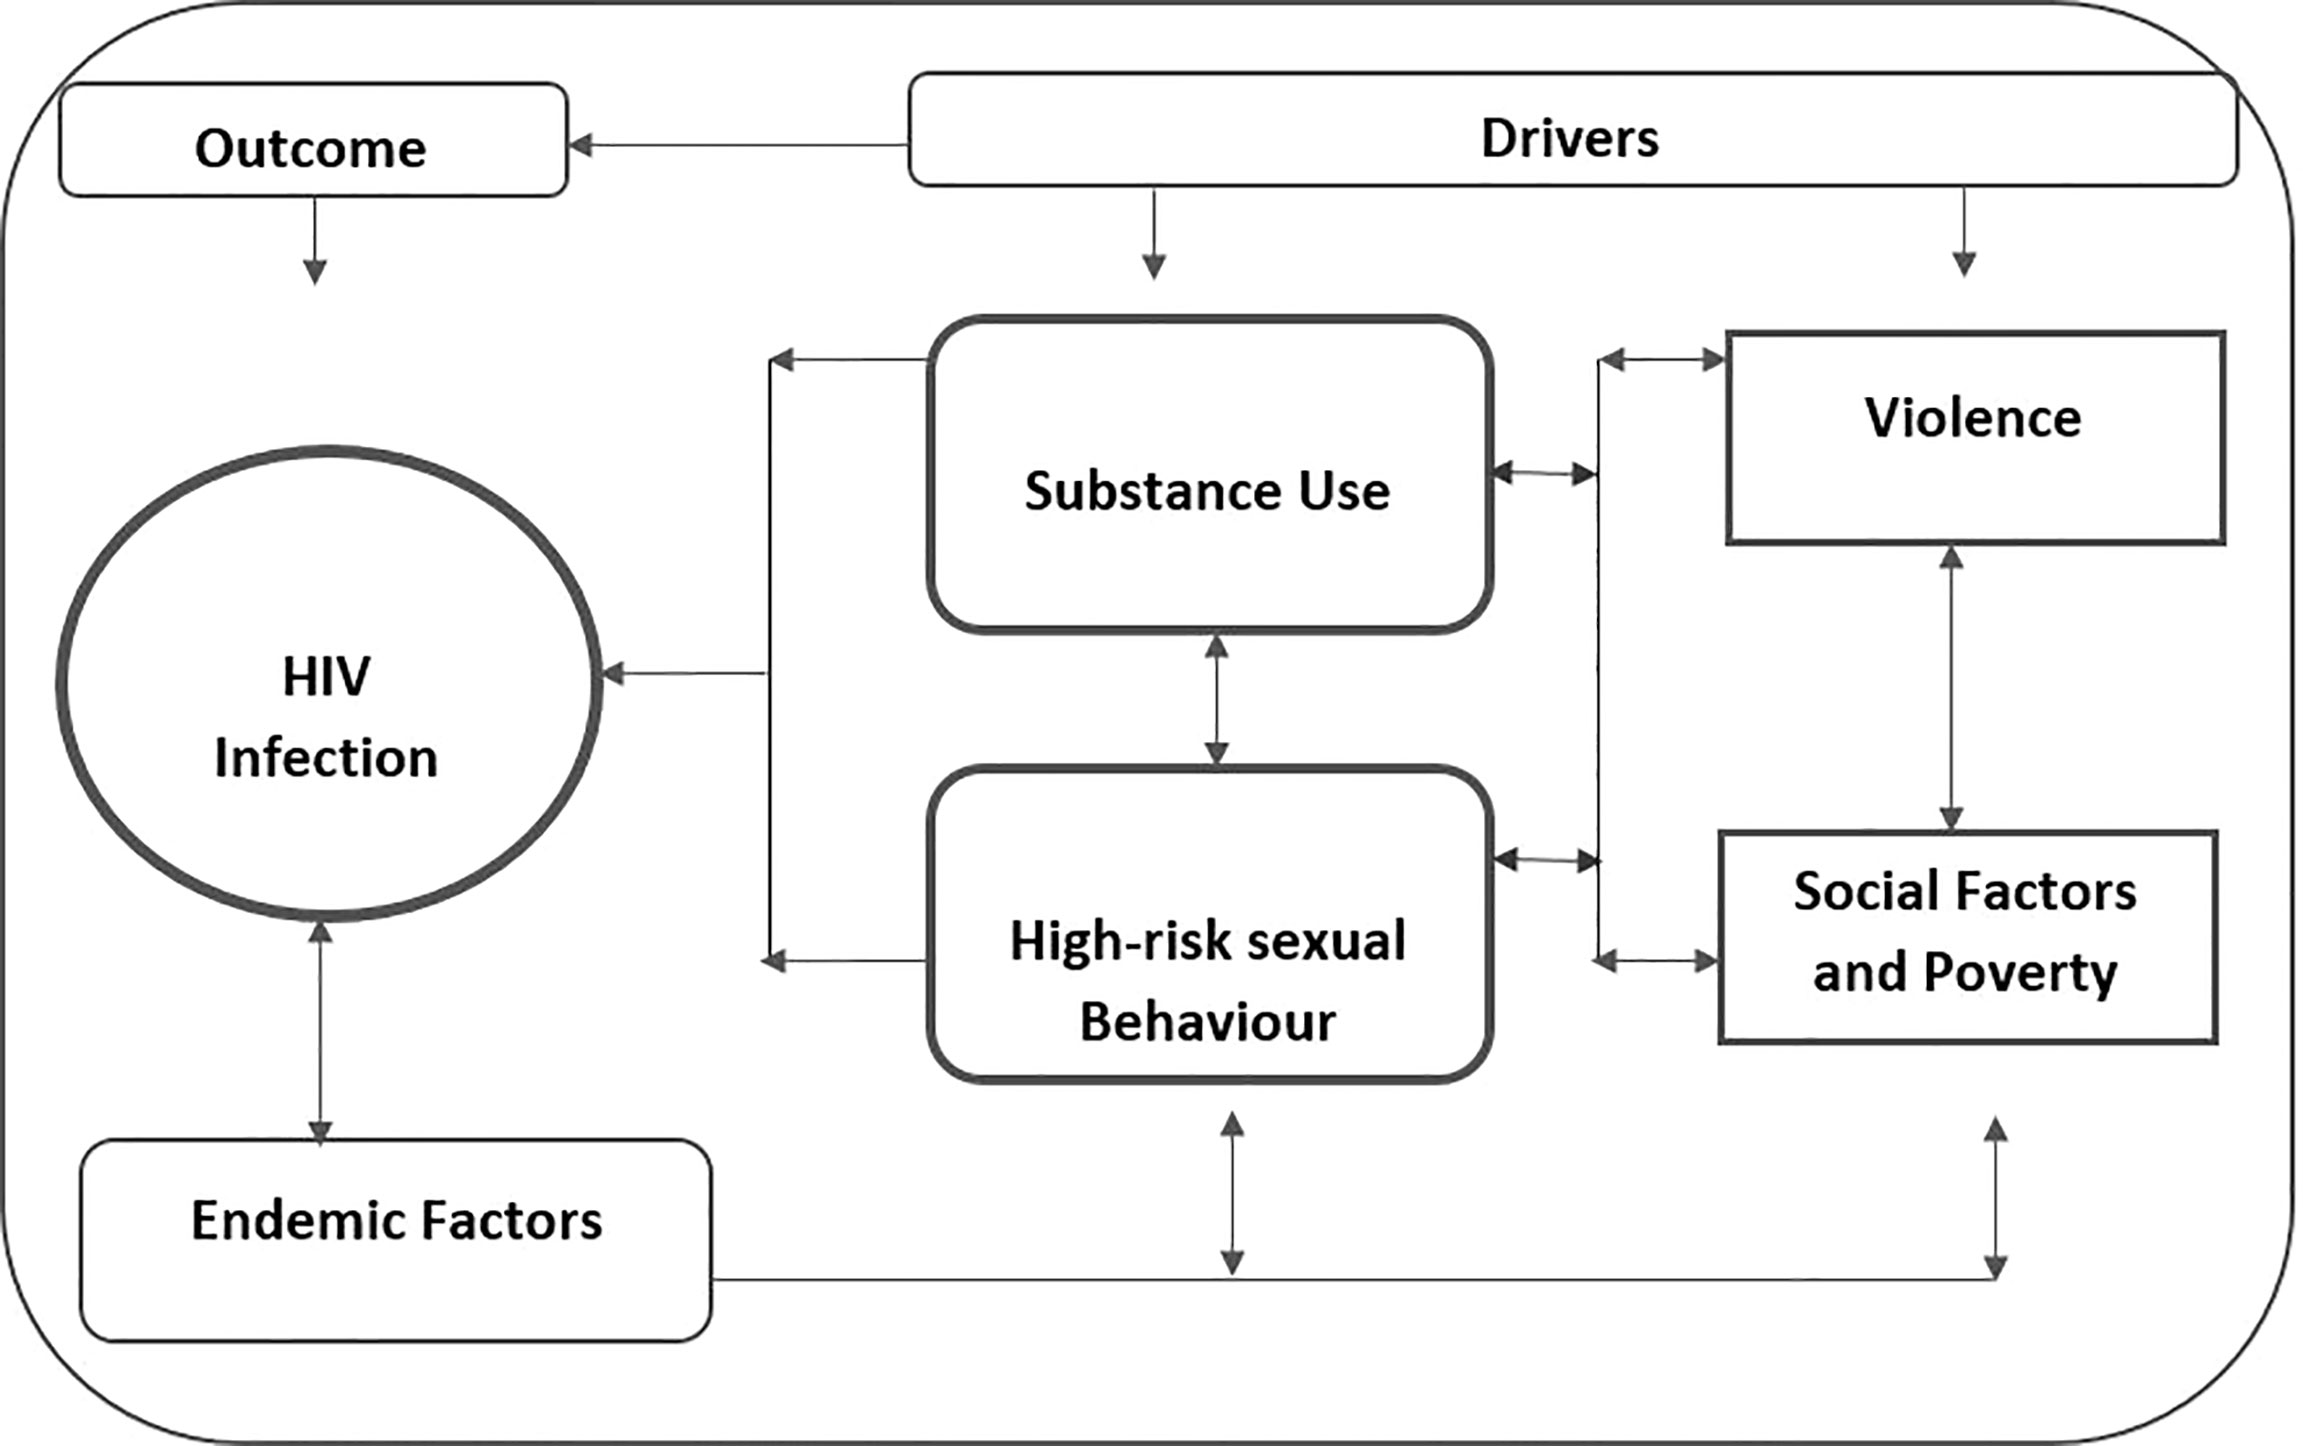 Frontiers | The Syndemic of Substance Use, High-Risk Sexual Behavior, and  Violence: A Qualitative Exploration of the Intersections and Implications  for HIV/STI Prevention Among Key Populations in Lagos, Nigeria